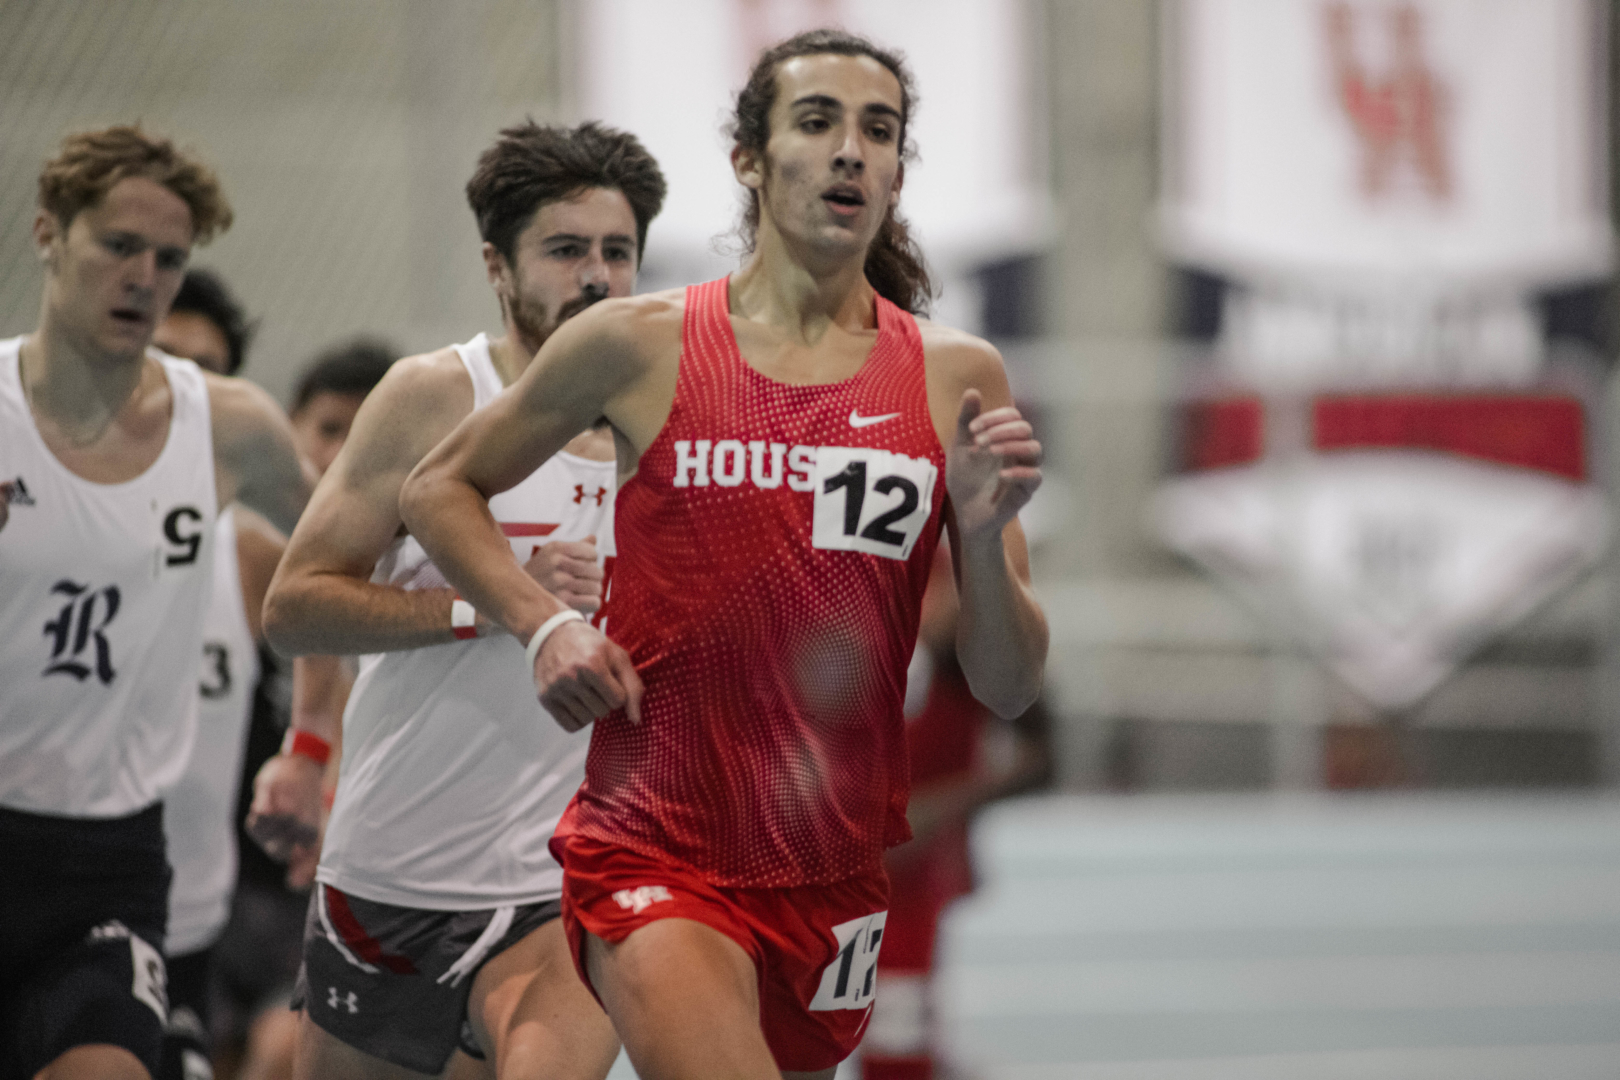 Senior Devin Vallejo-Bannister was part of the UH men's distance medley relay team that set the Charlie Thomas Invitational meet record over the weekend. | James Schillinger/The Cougar